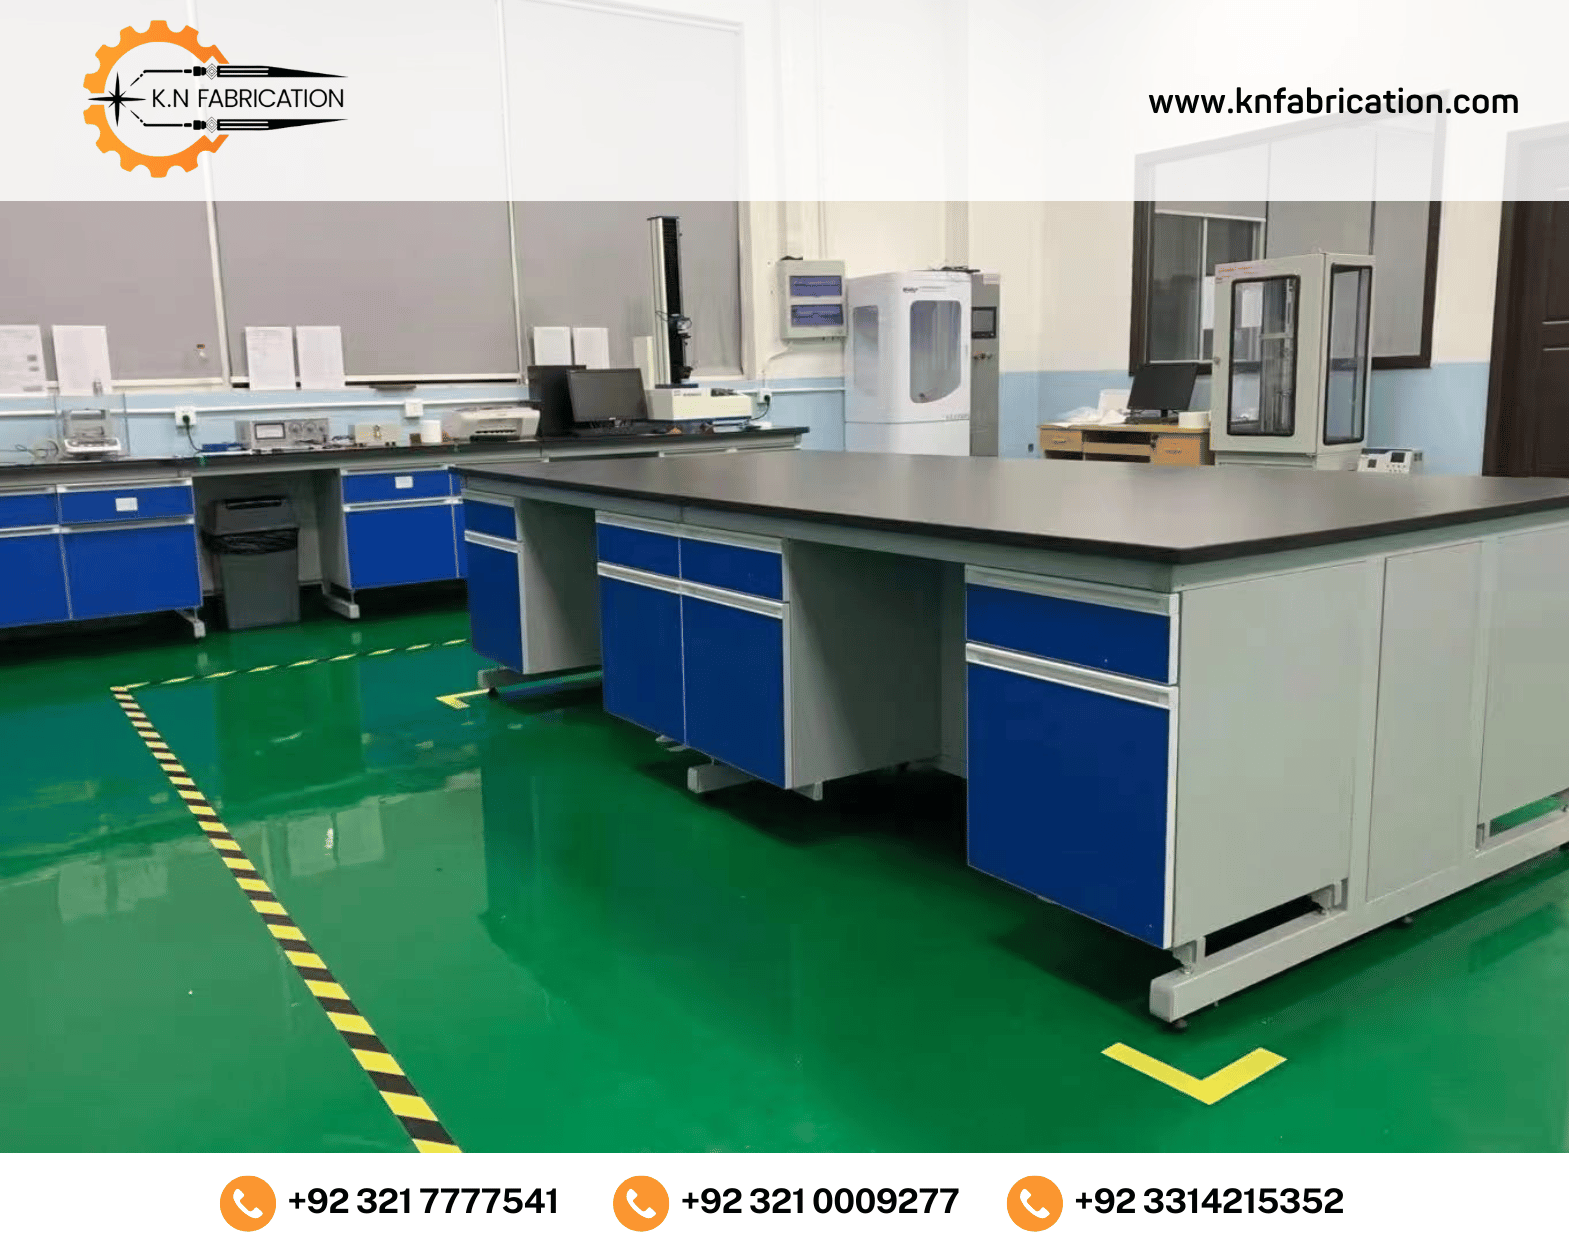 Functional and stylish laboratory furniture in Pakistan by K.N Fabrication